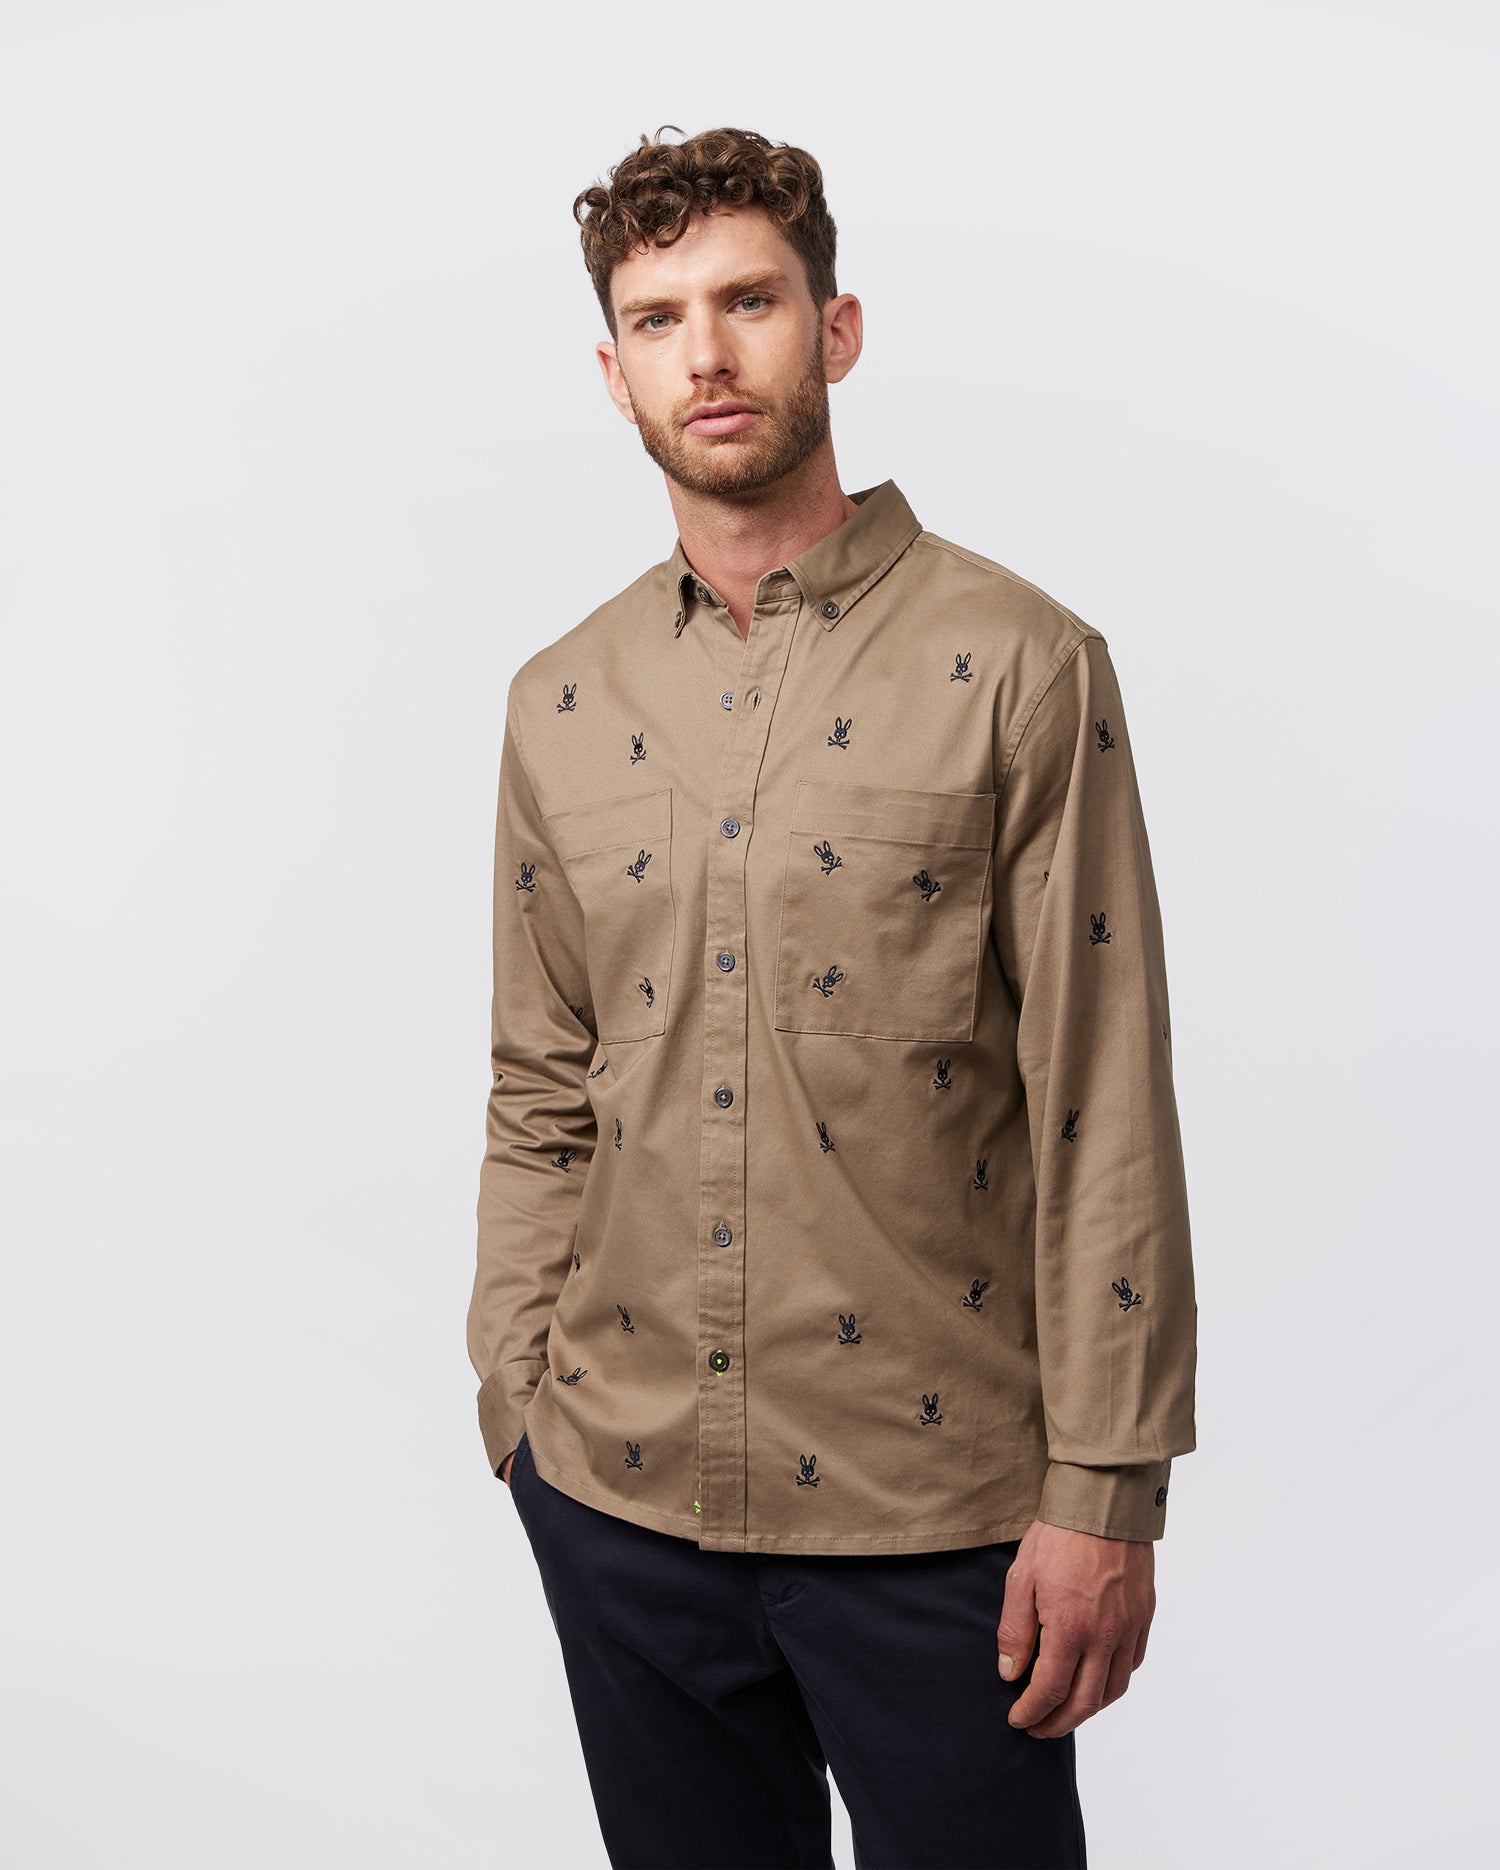 Louis Vuitton Solid Casual Button-Down Shirts for Men for sale